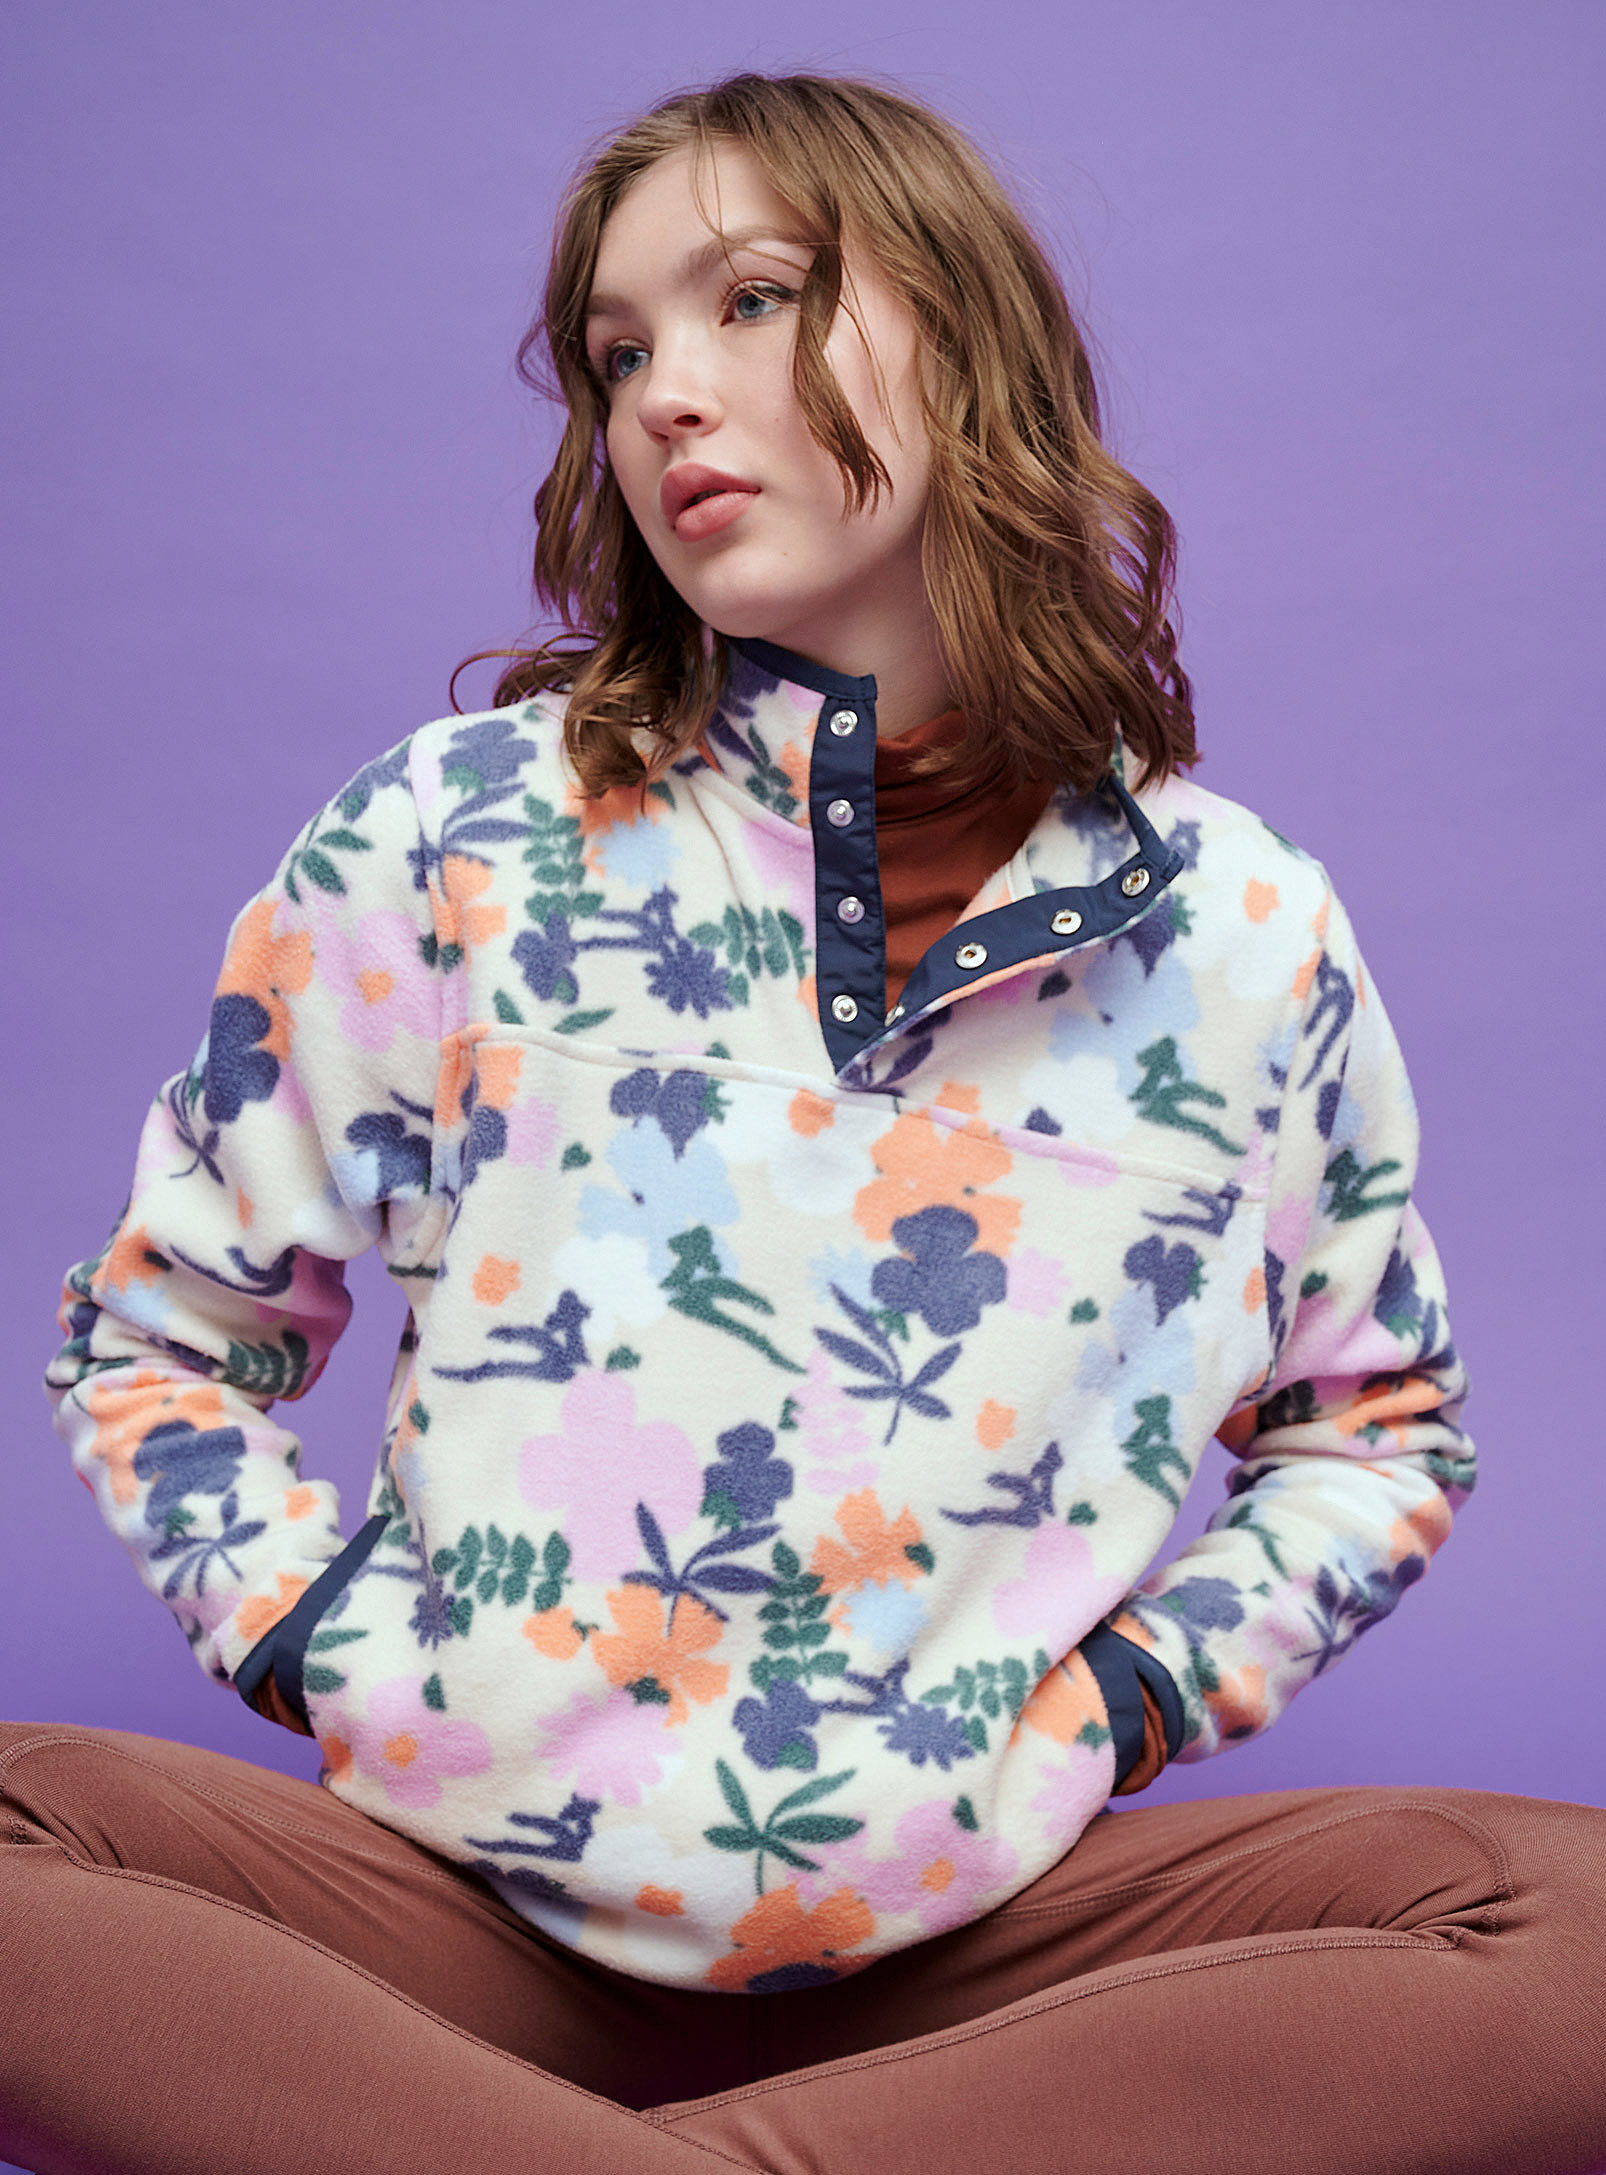 A person wearing the floral fleece 